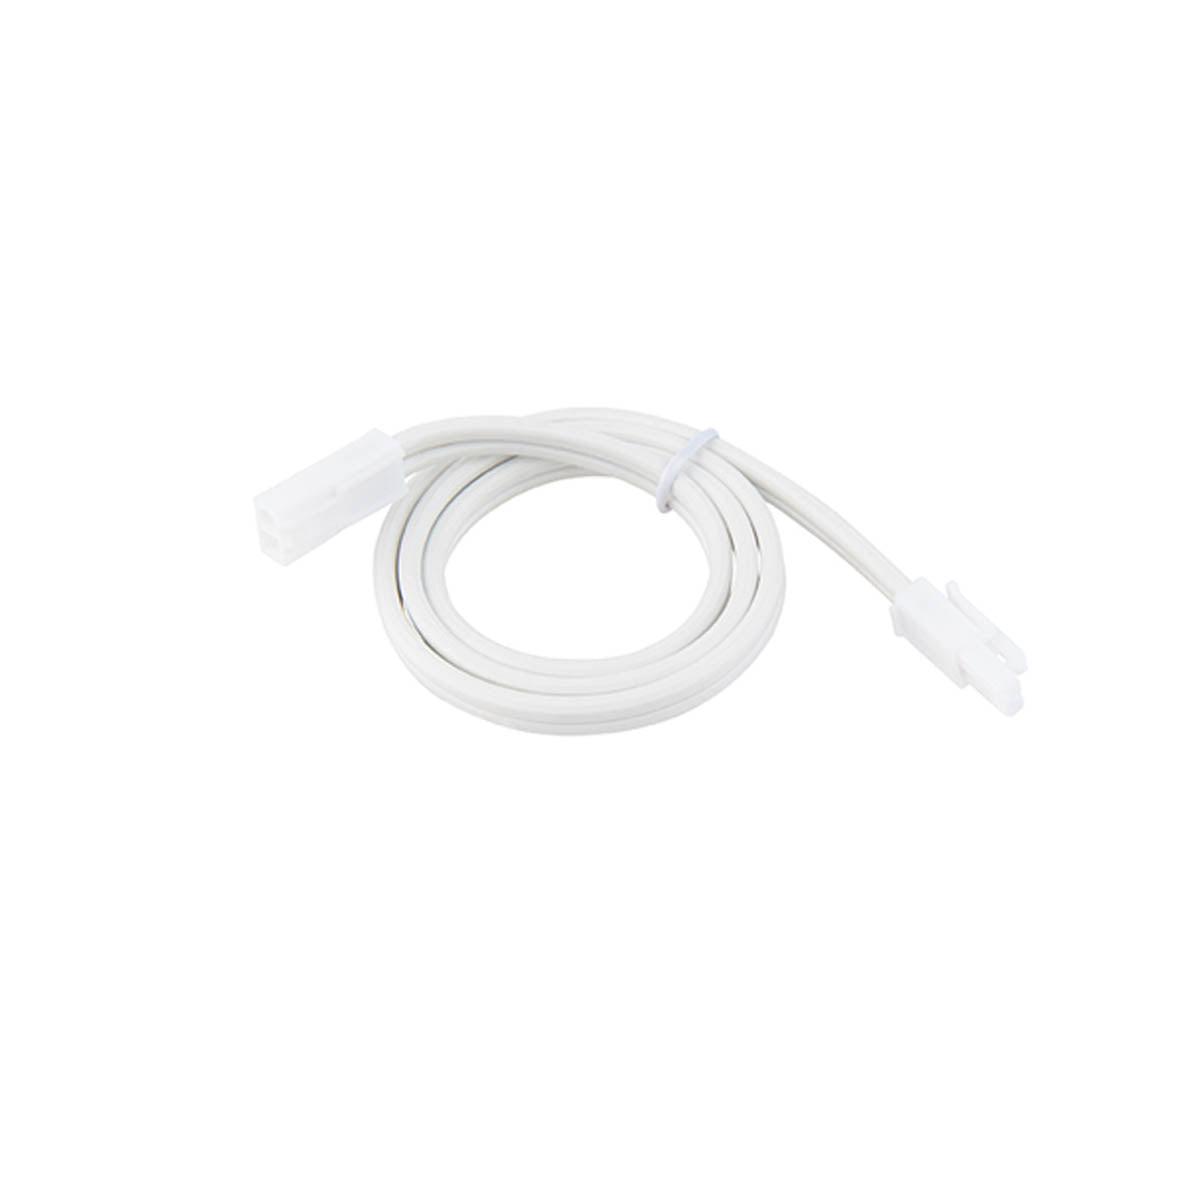 12in. Interconnect Cable for 3-CCT Puck Light, White - Bees Lighting